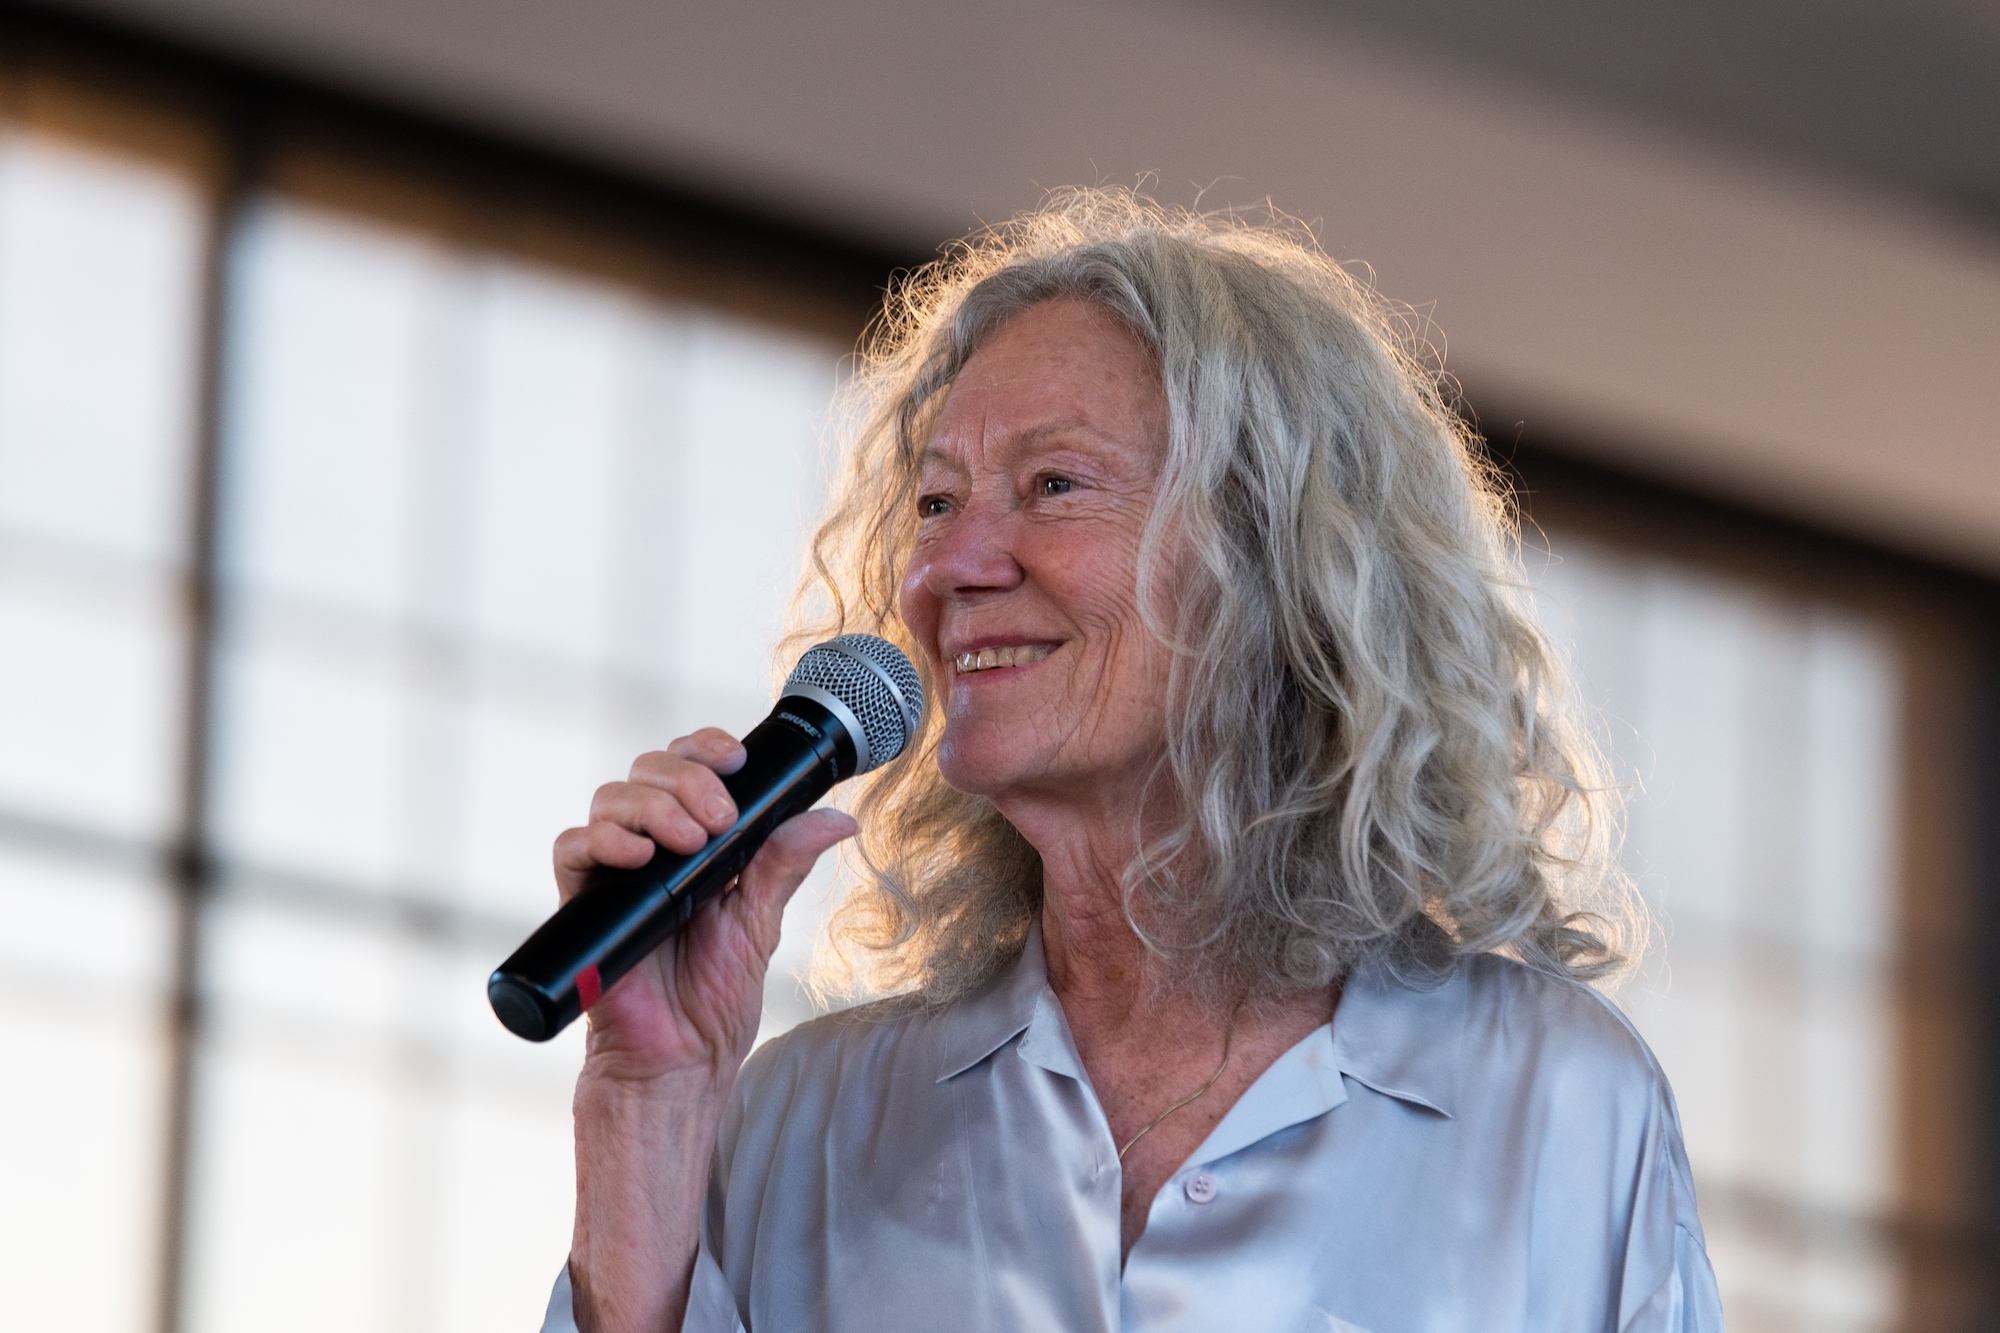 A woman smiling while speaking into a microphone